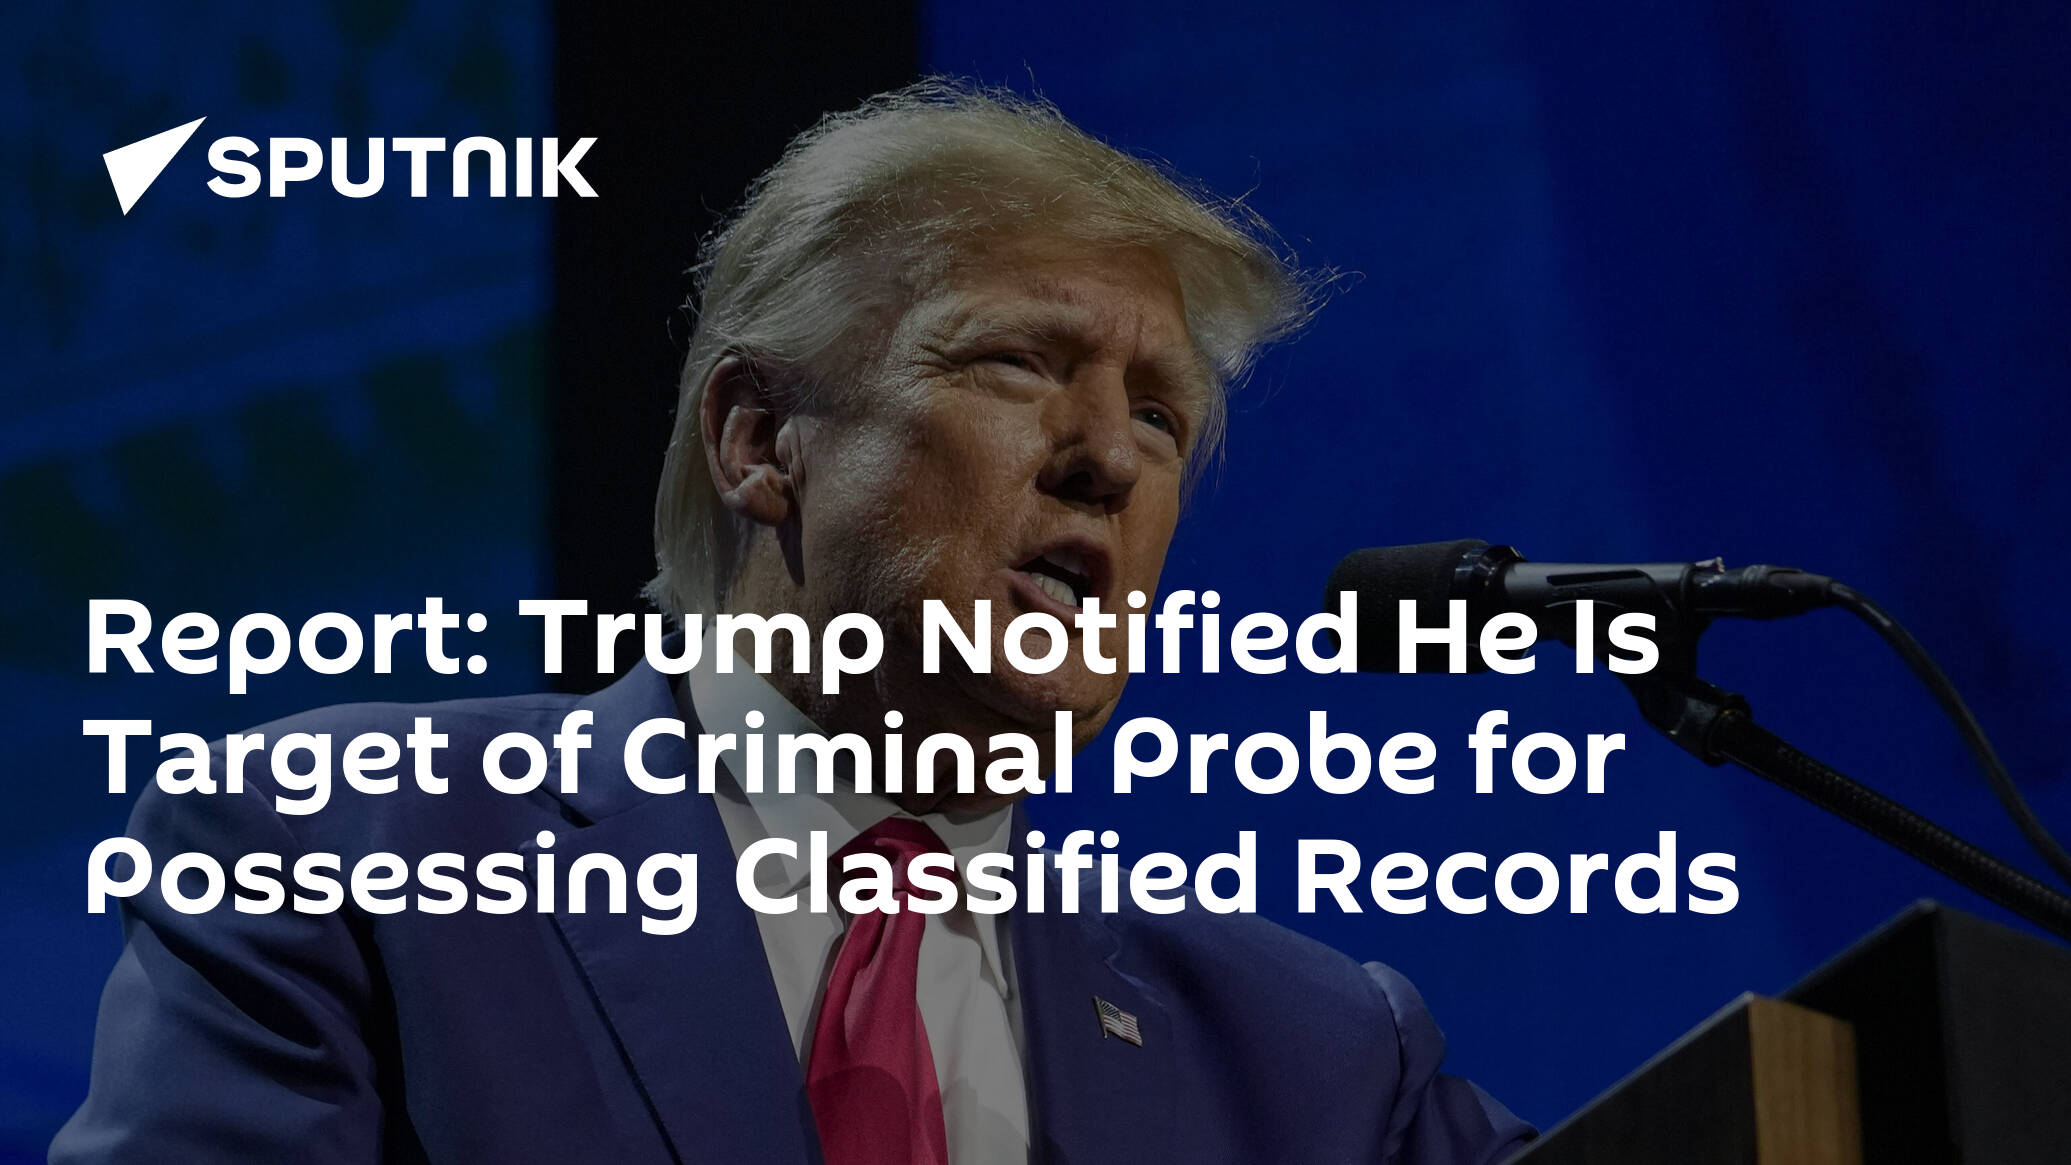 Report: Trump Notified He Is Target of Criminal Probe for Possessing Classified Records